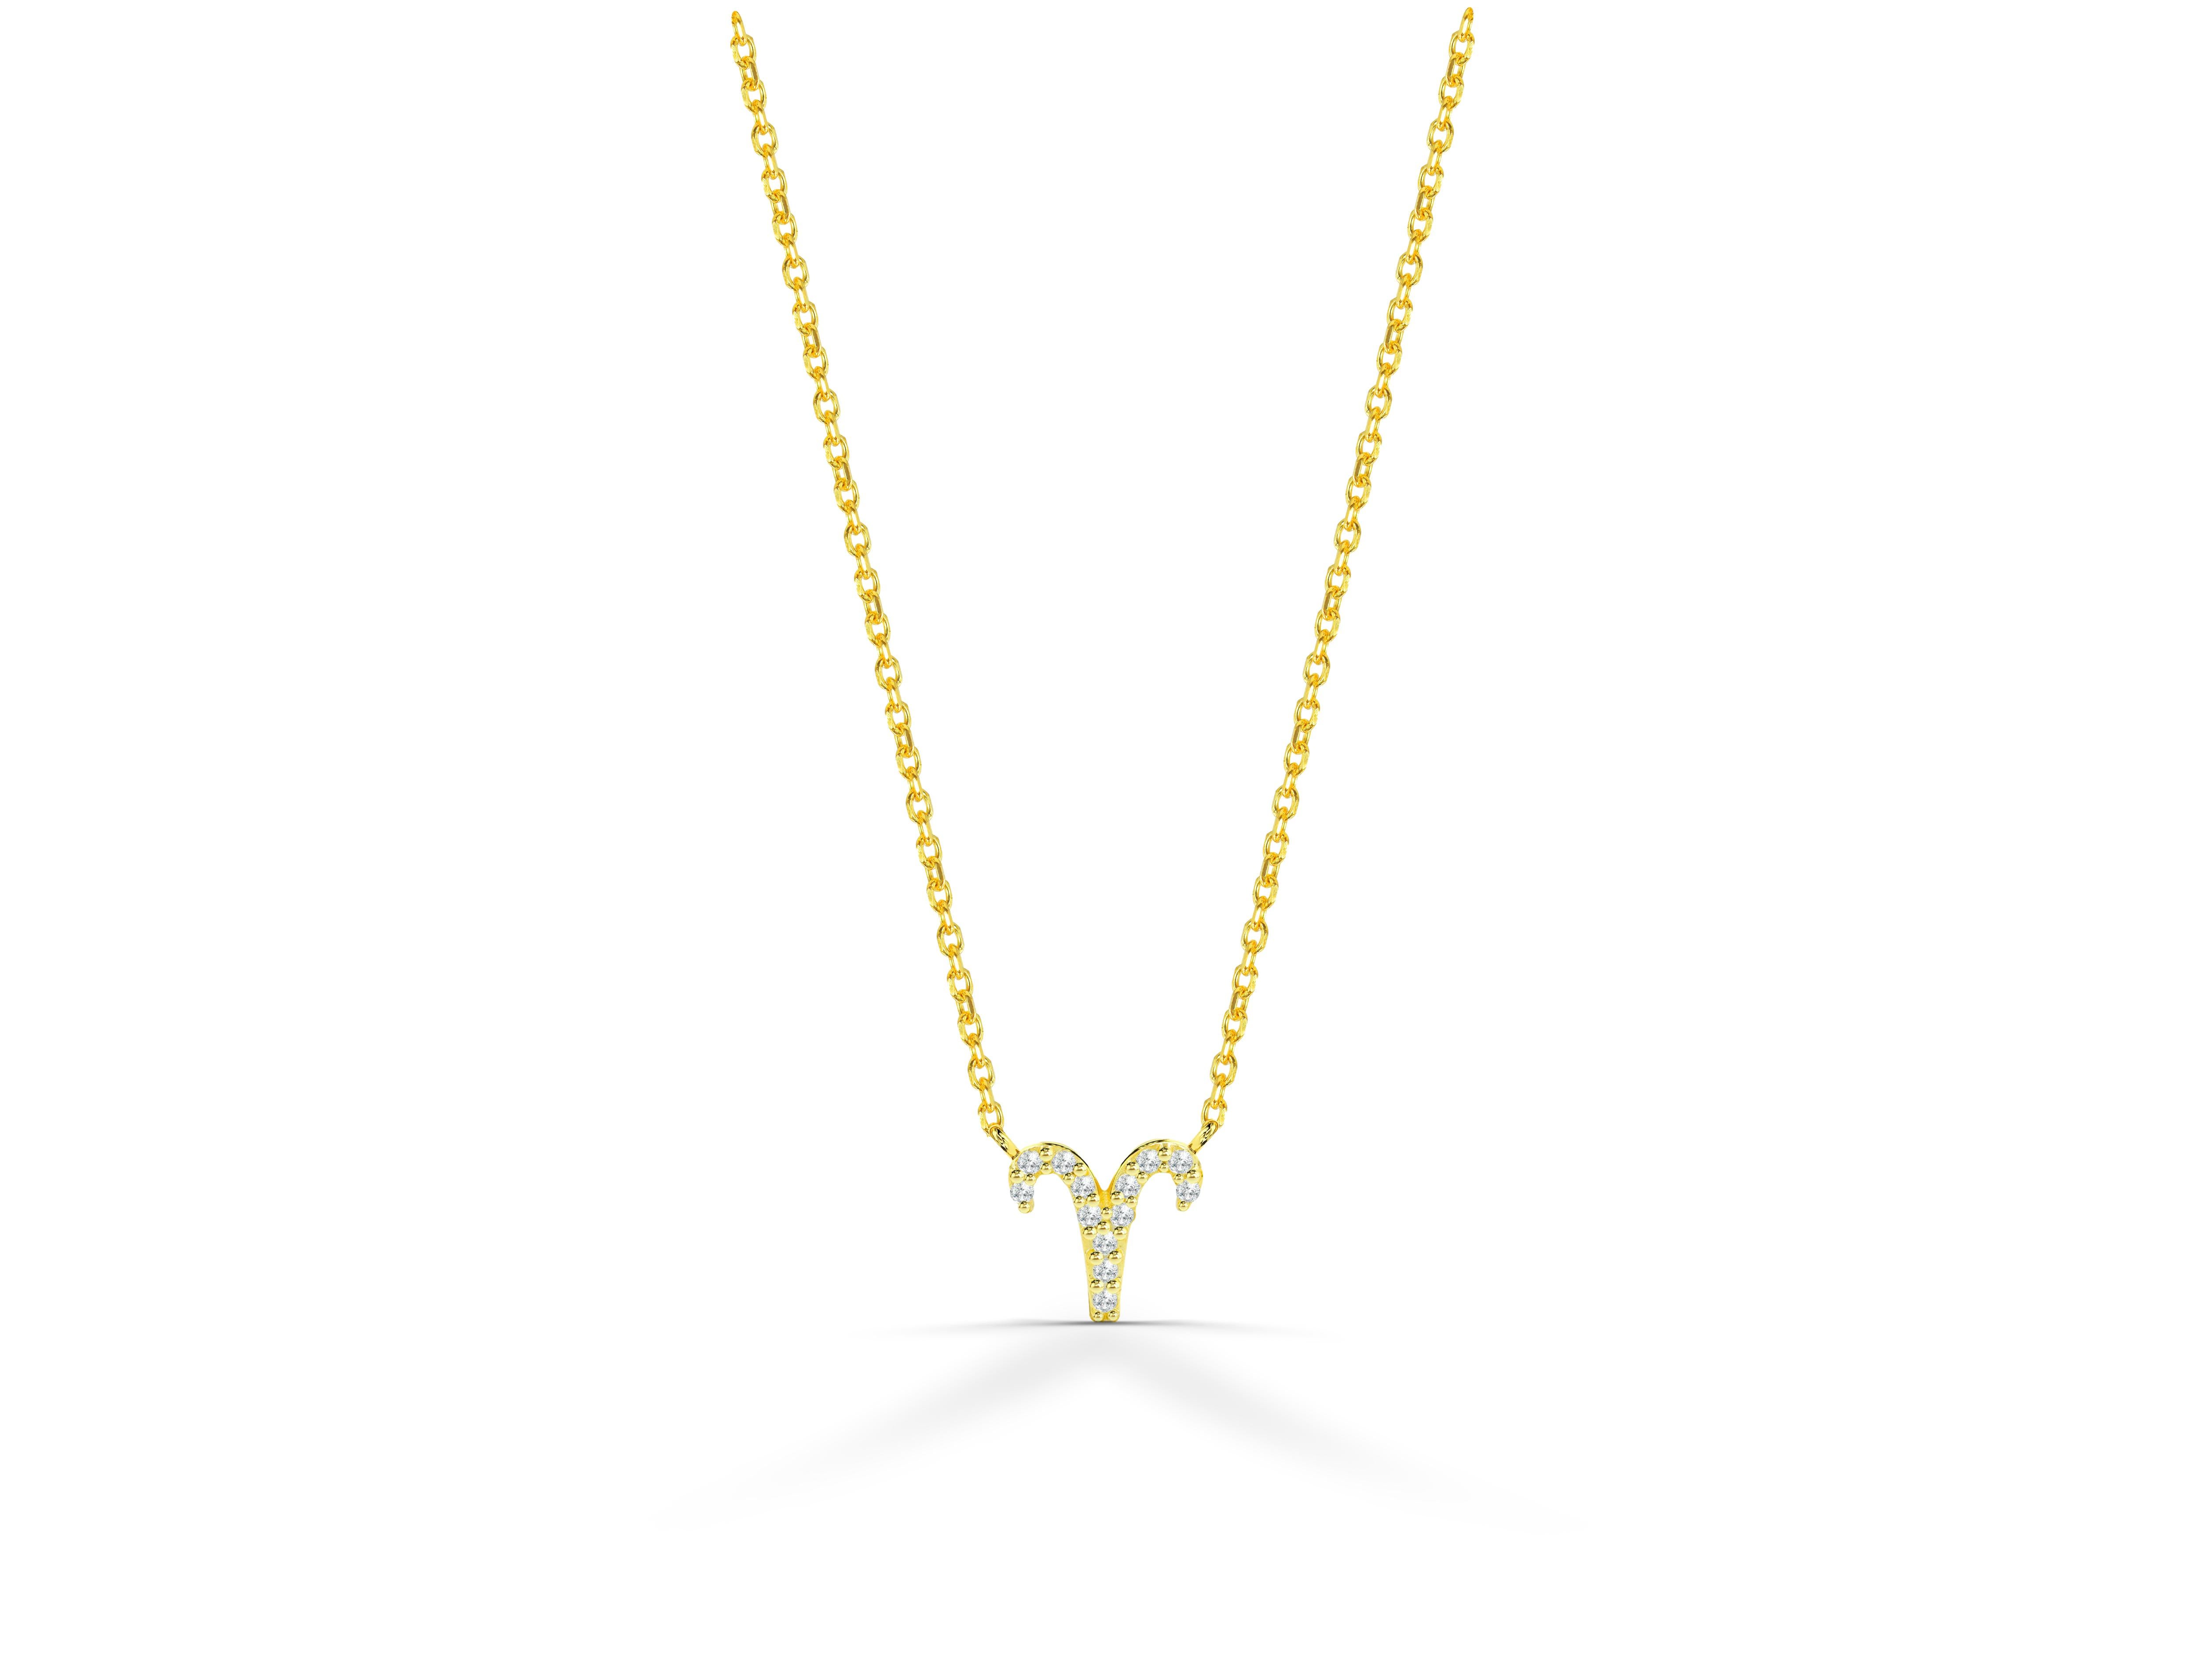 Beautiful and Sparkly Diamond Aries Necklace is made of 18k solid gold available in three colors of gold, Yellow Gold / Rose Gold / White Gold.

Natural genuine round cut diamond each diamond is hand selected by me to ensure quality and set by a